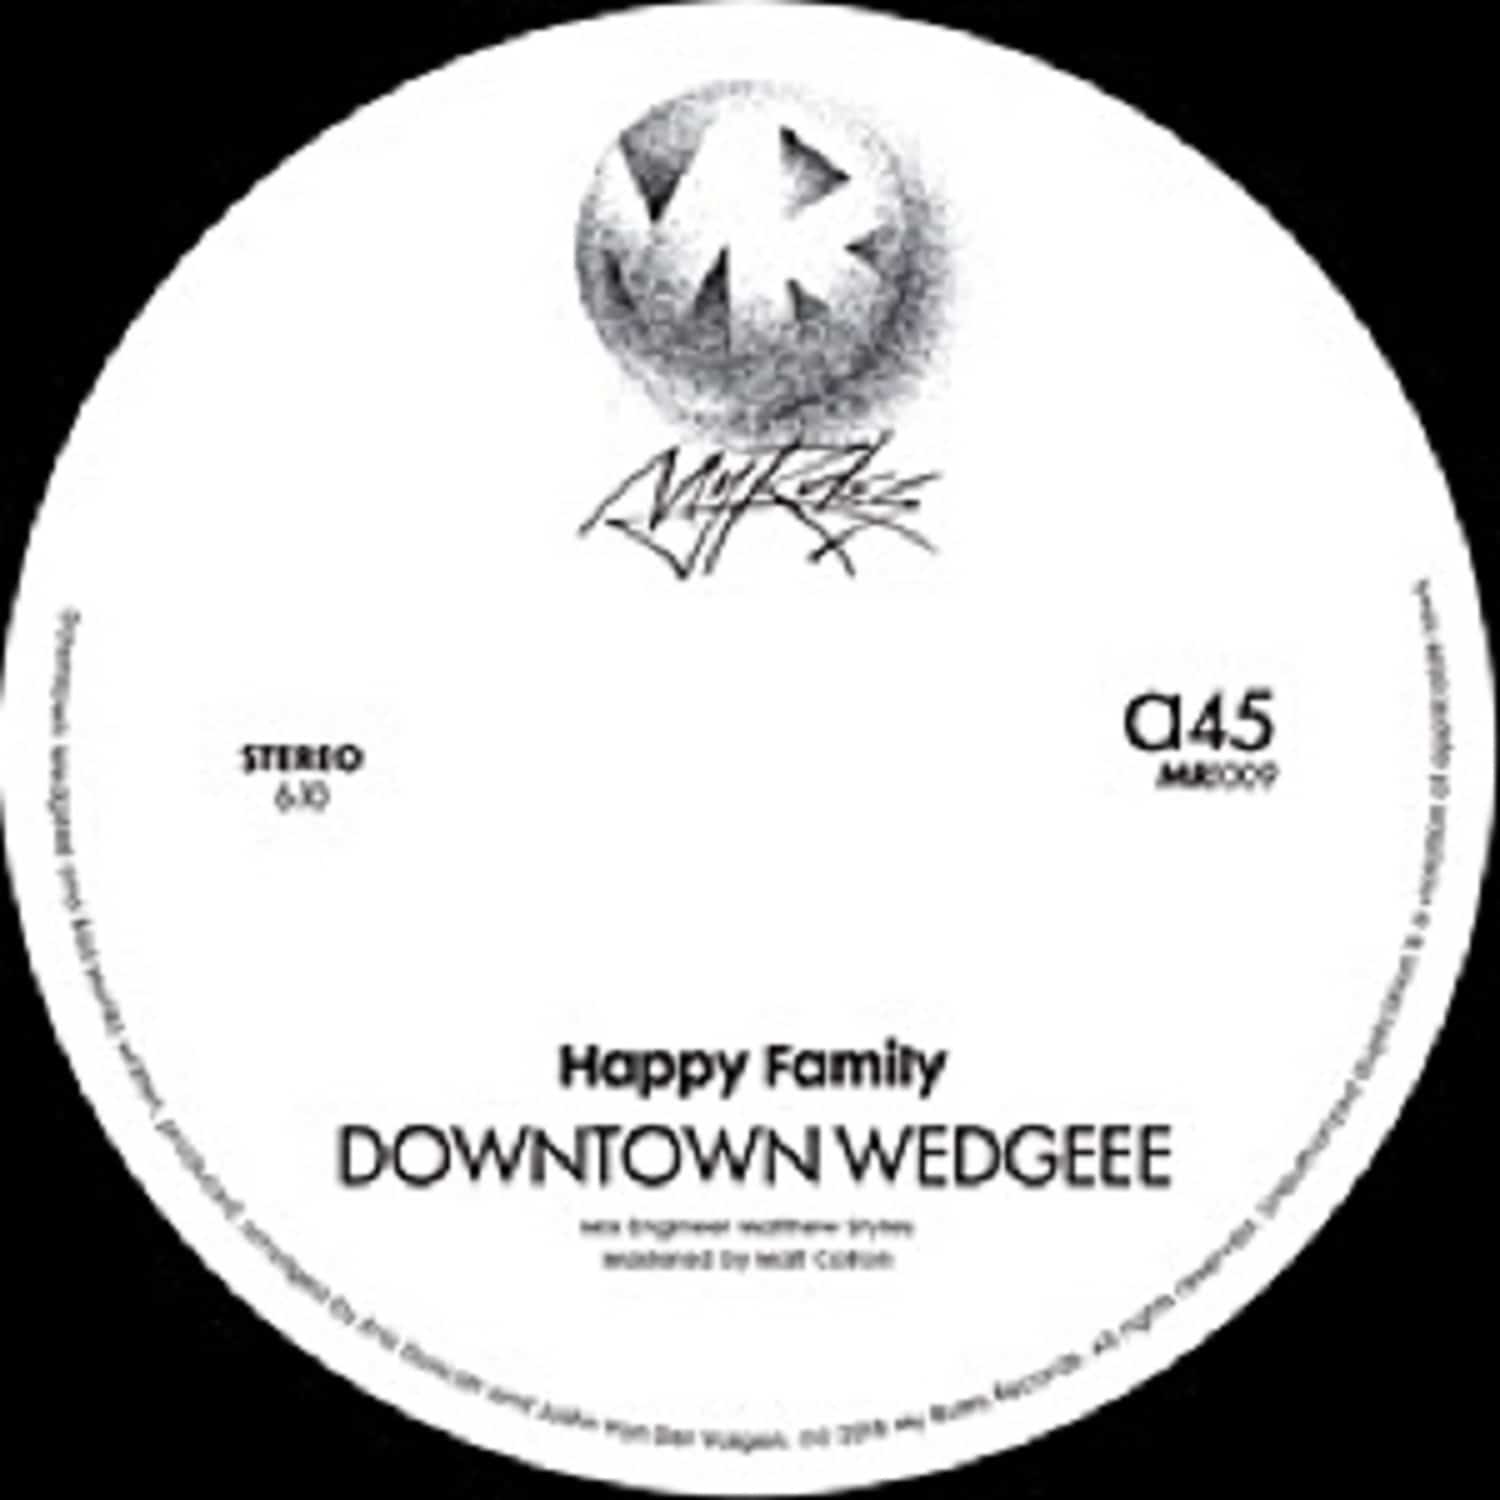 Happy Family - DOWNTOWN WEDGEEE / BAD MONKS